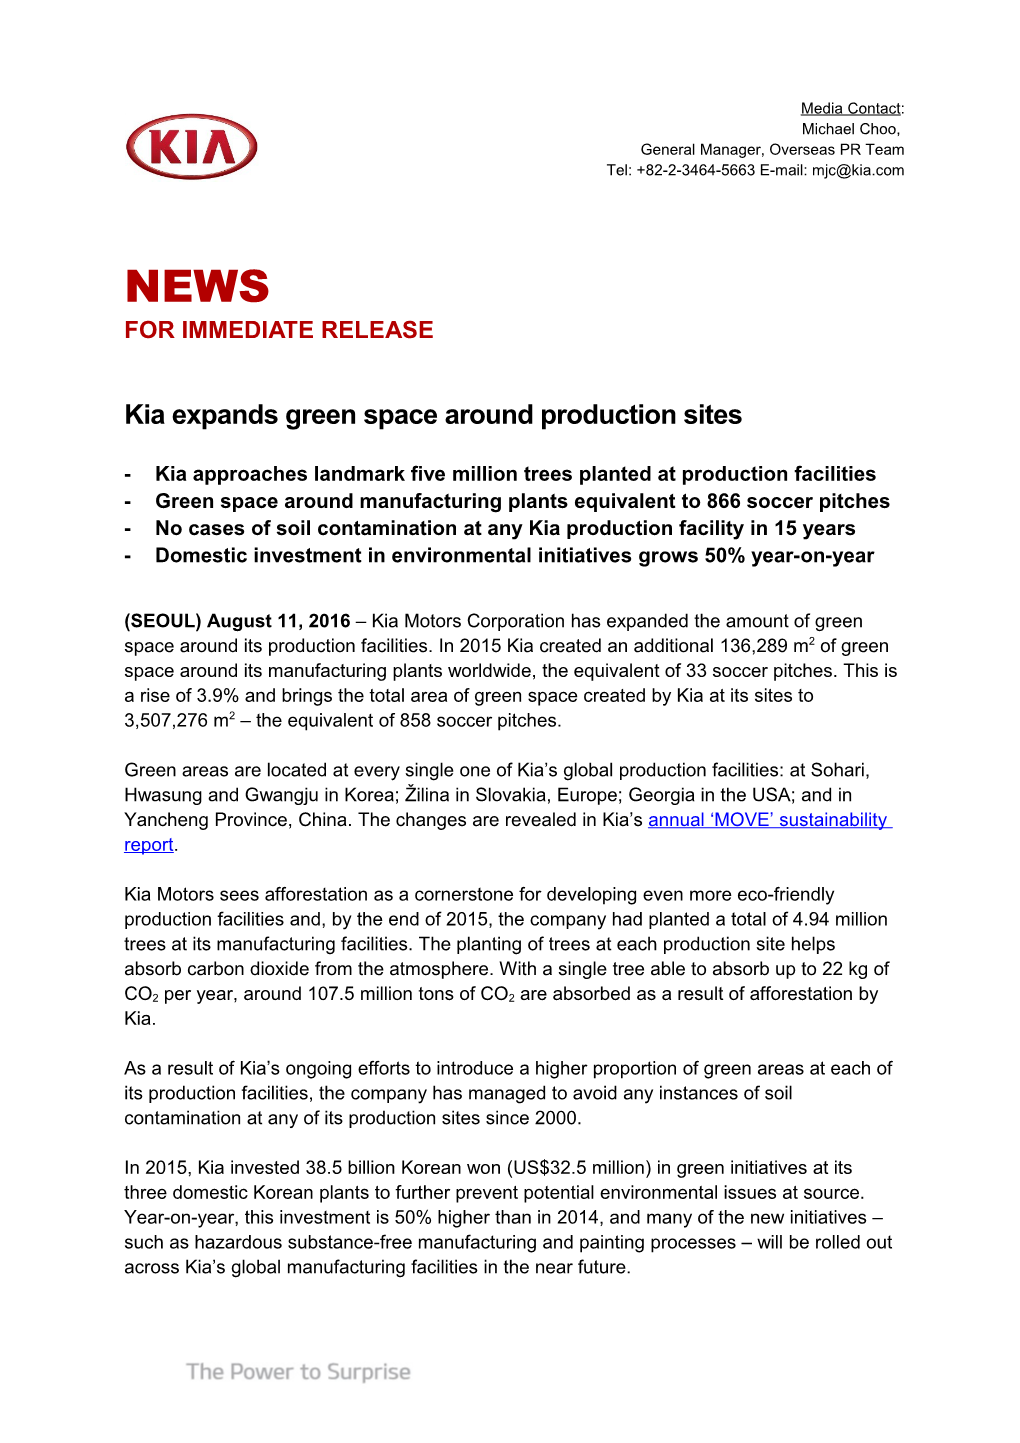 Kia Expands Green Space Around Production Sites